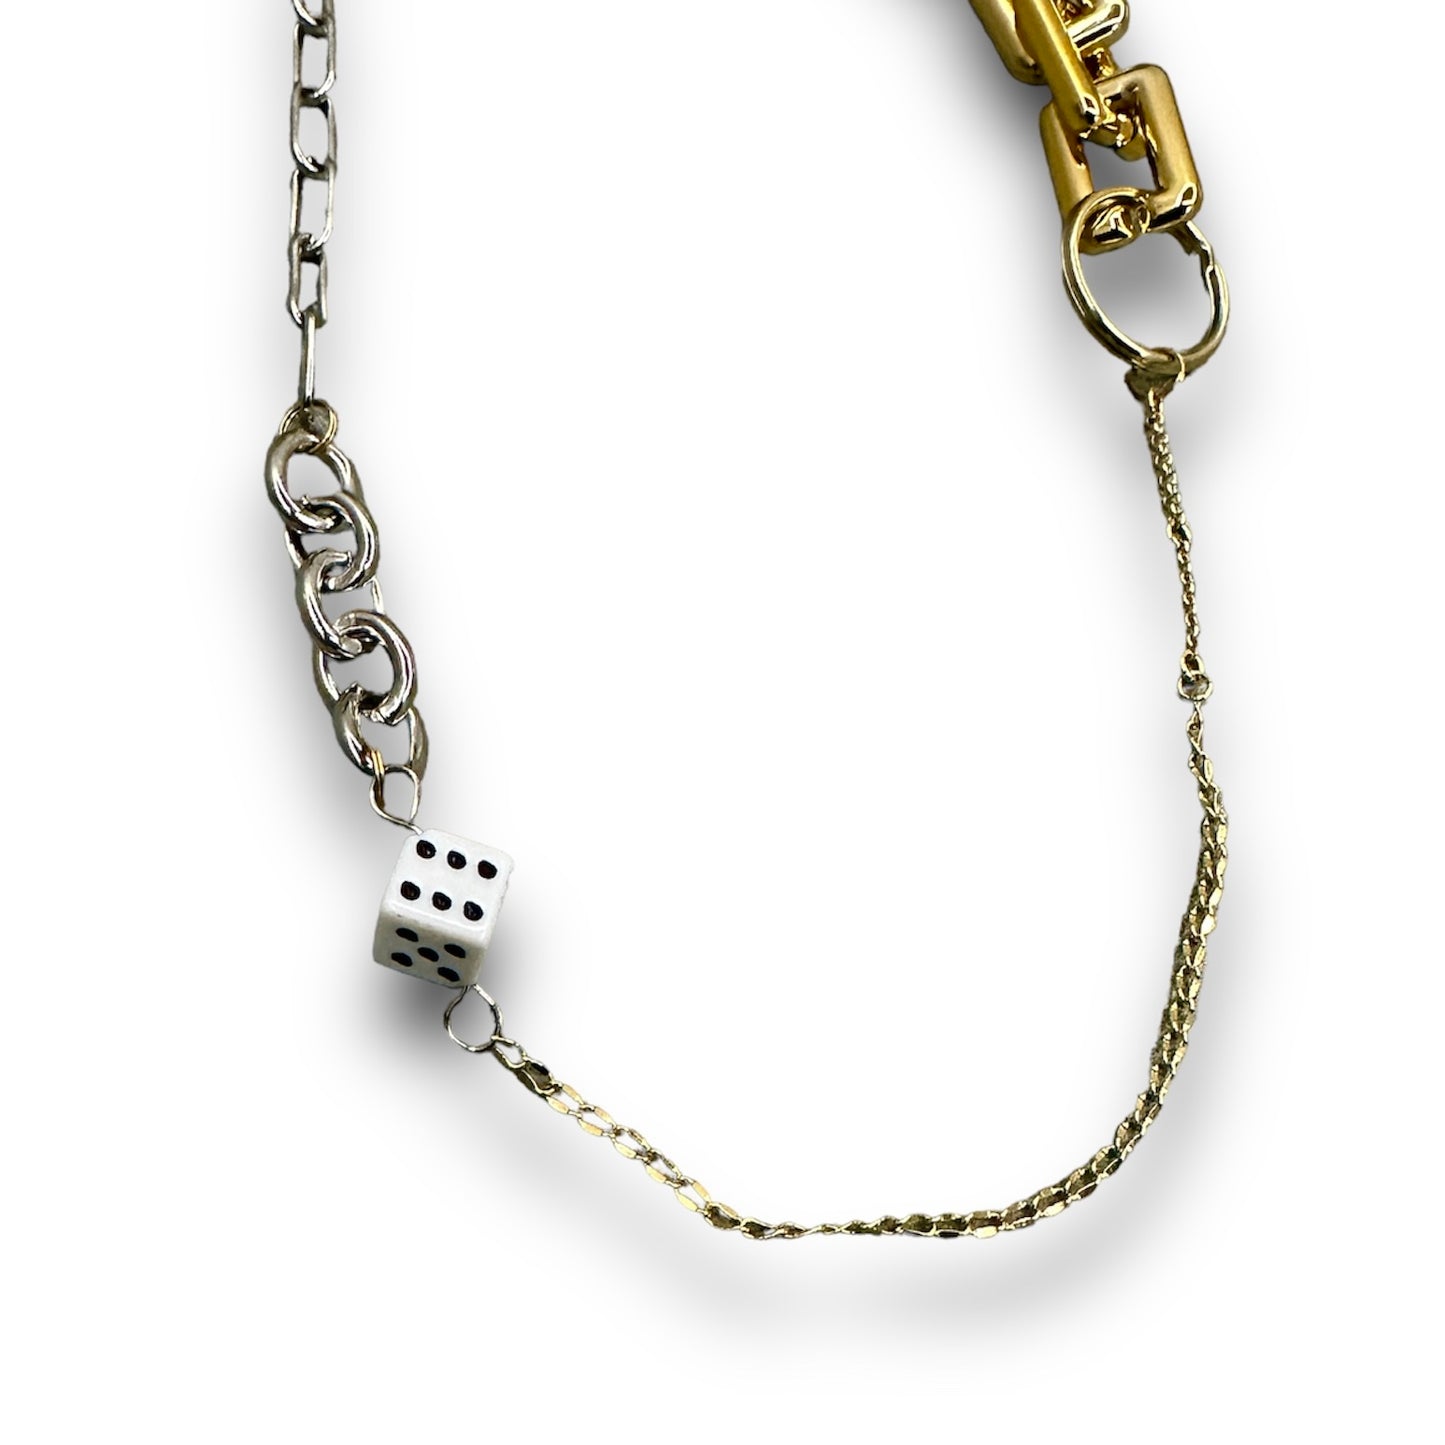 BLESS / MATERIALMIX NECKLACE "DICE"